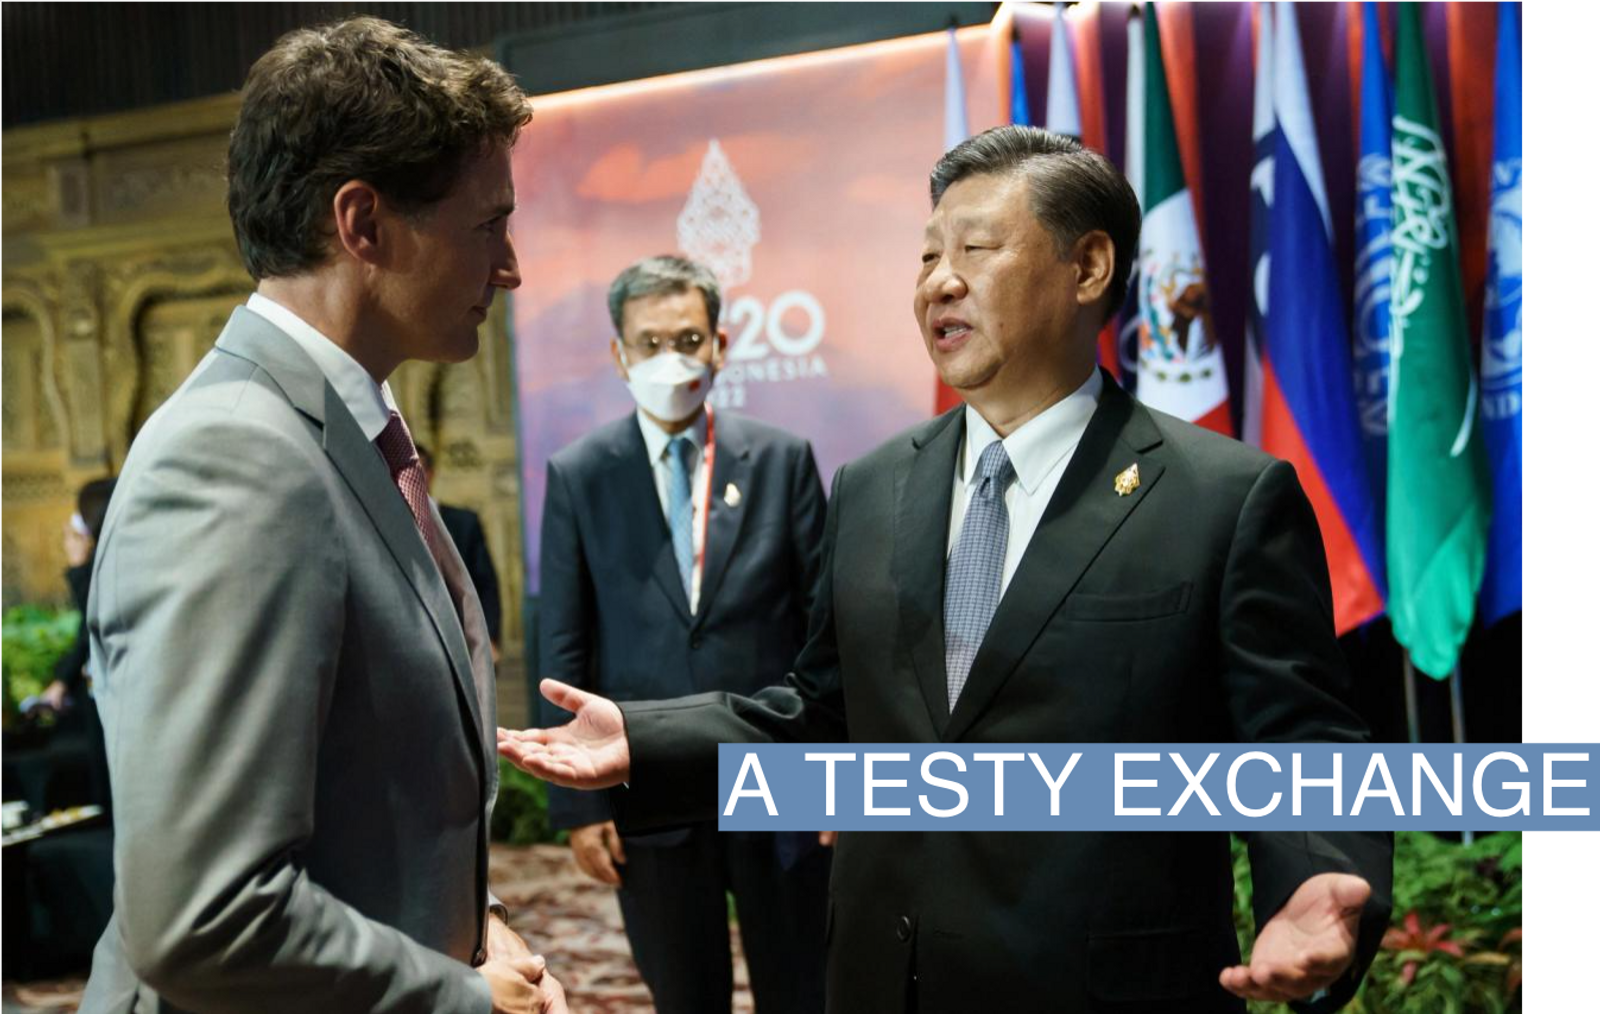 Canada's Prime Minister Justin Trudeau speaks with China's President Xi Jinping at the G20 Leaders' Summit in Bali, Indonesia